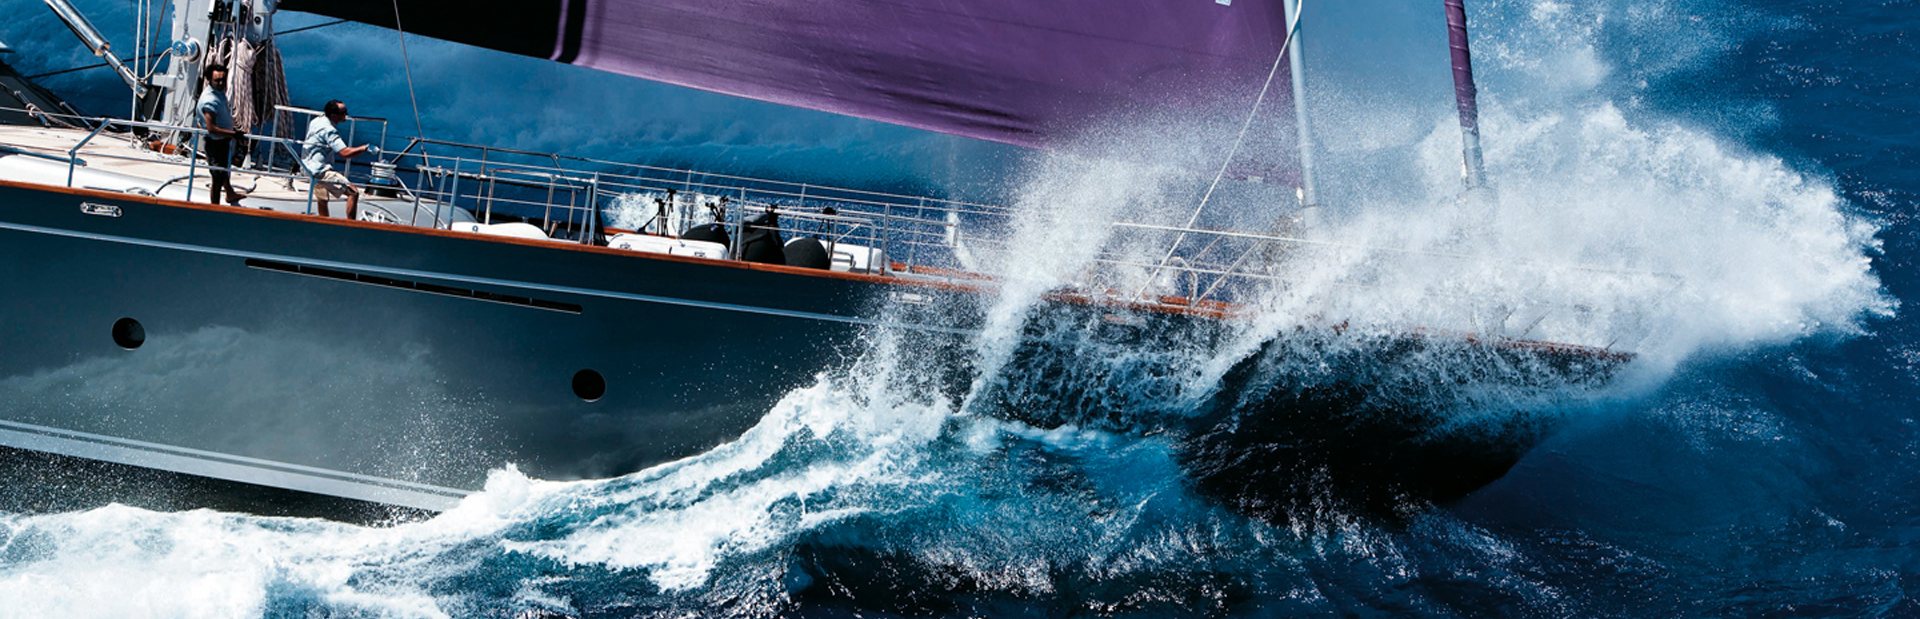 Wave splashing over the bow of yacht in Perini Navi yacht on charter for regatta